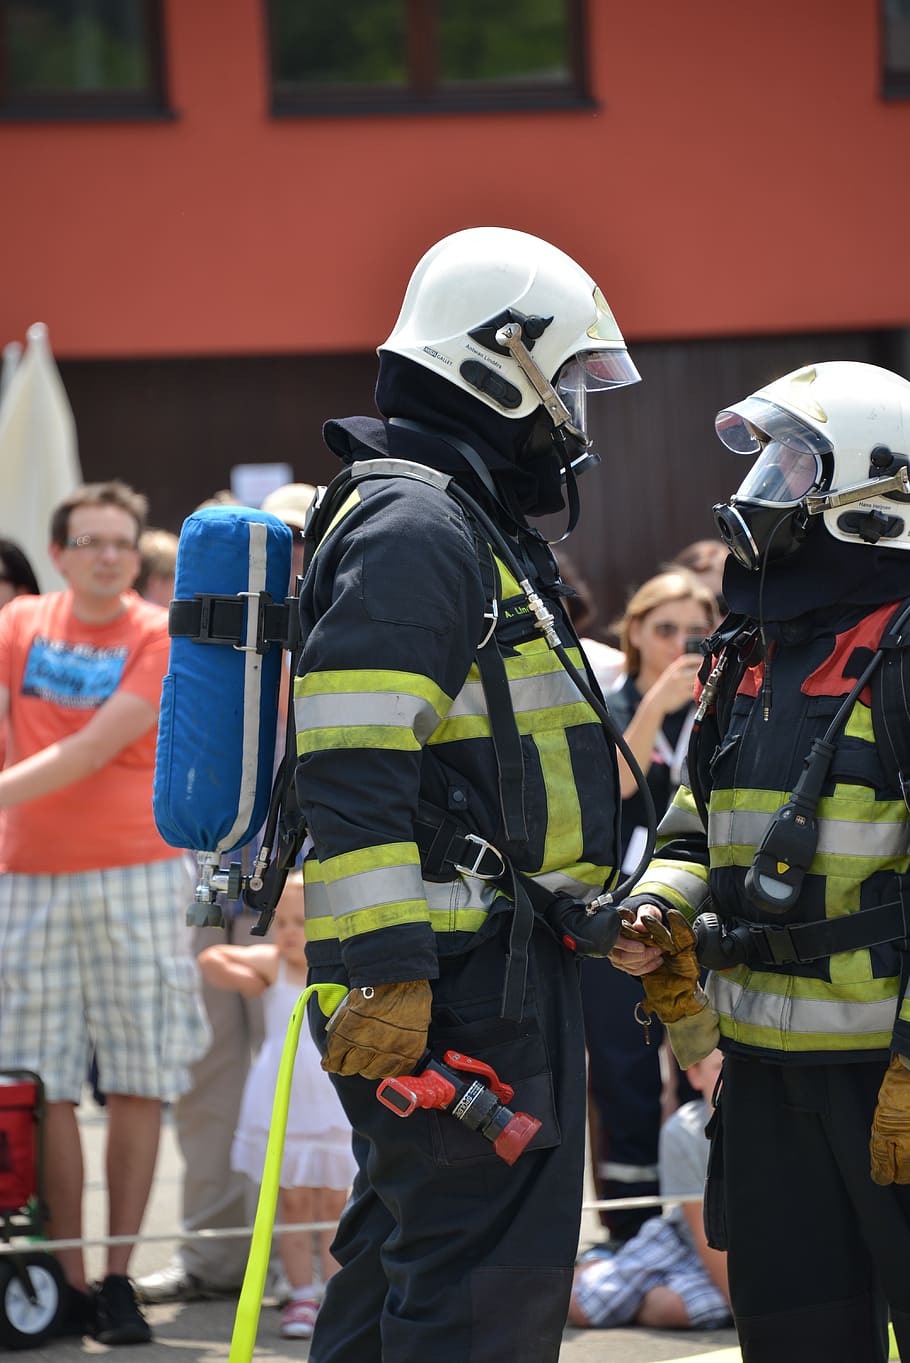 fire, respiratory protection, feuerloeschuebung, firefighters, delete, breathing apparatus, use, fire fighter, delete exercise, brand